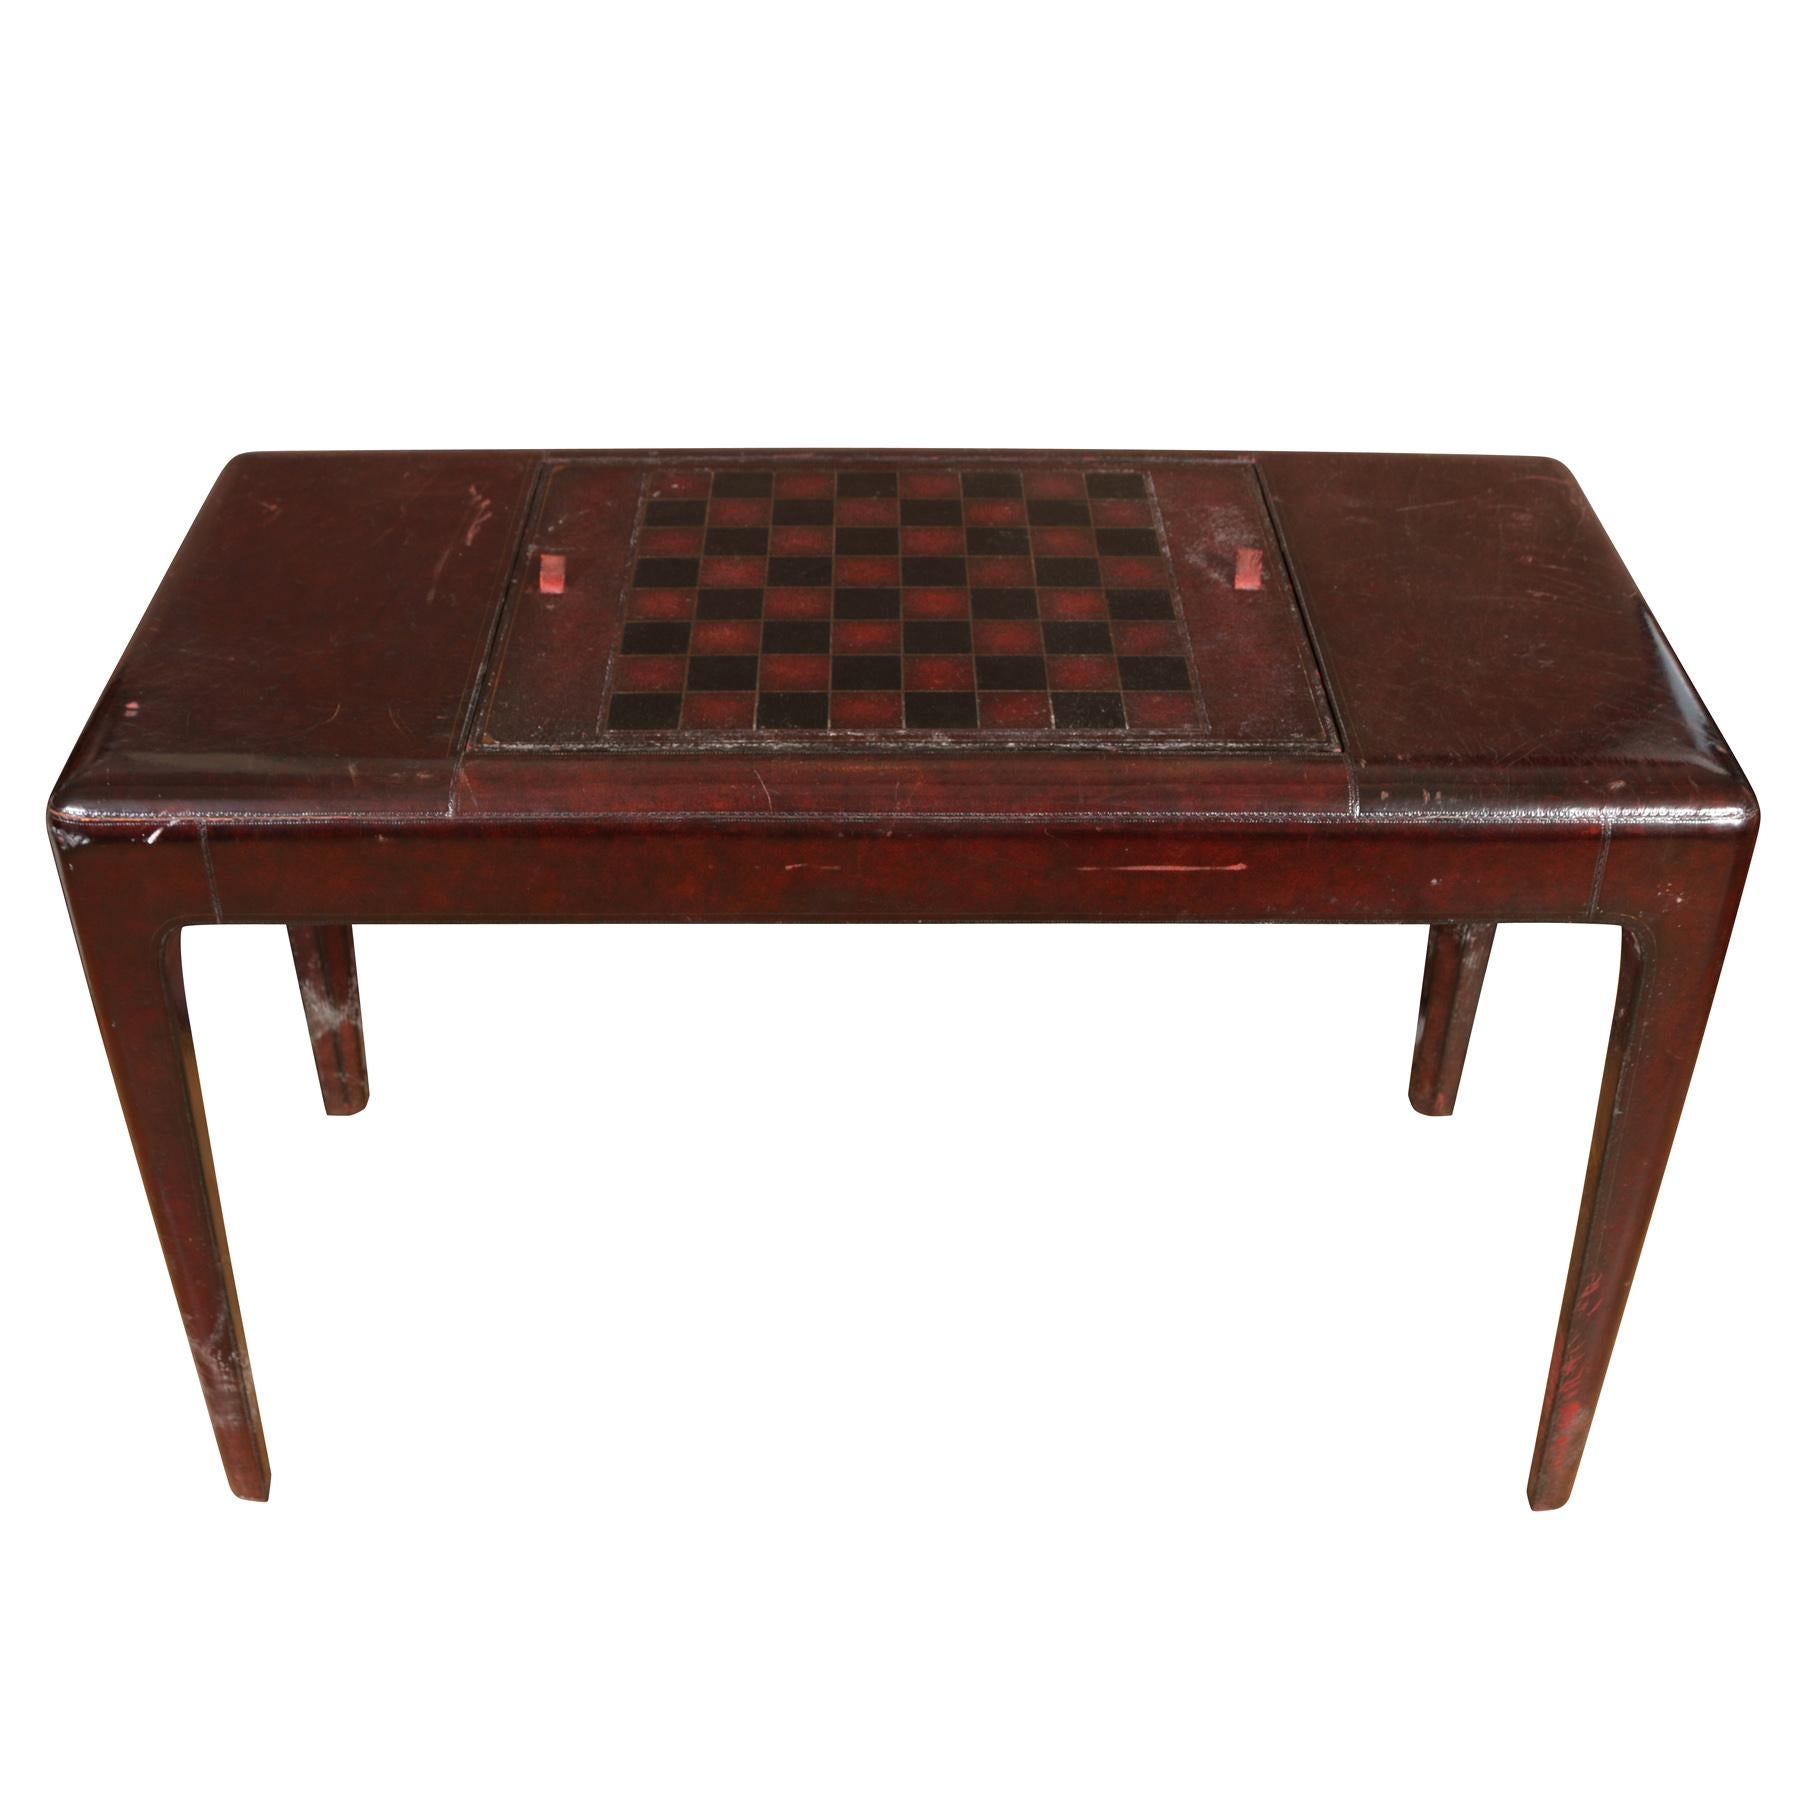 Antique Leather Games Table Backgammon or Chess In Good Condition For Sale In Locust Valley, NY